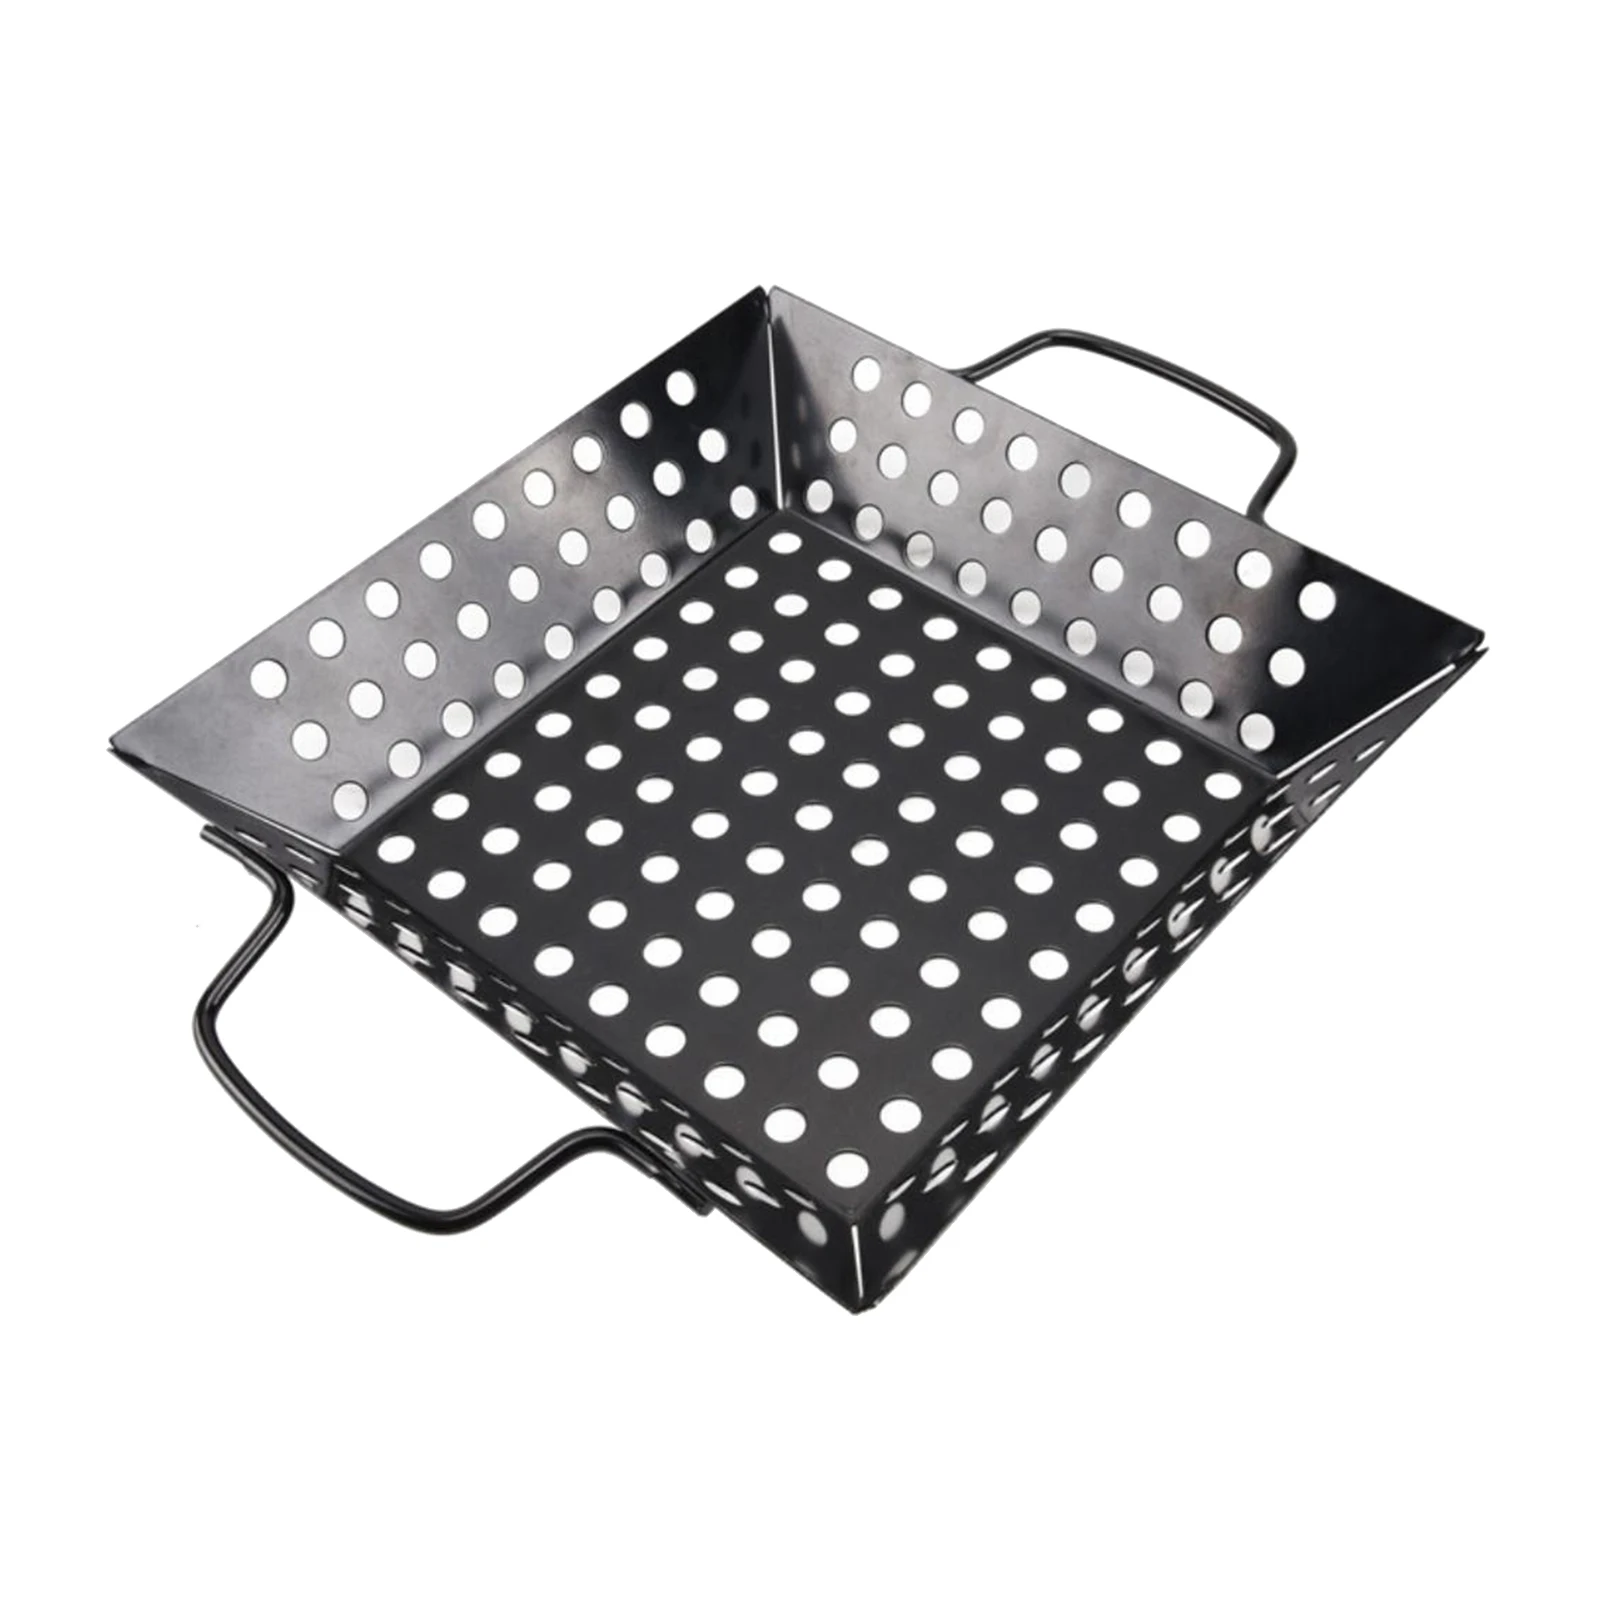 Non Stick Carbon Steel BBQ Vegetable Grill Square Grilling Basket Pan Outdoor Barbecue Utensils Grilling Tray for Meat Seafood